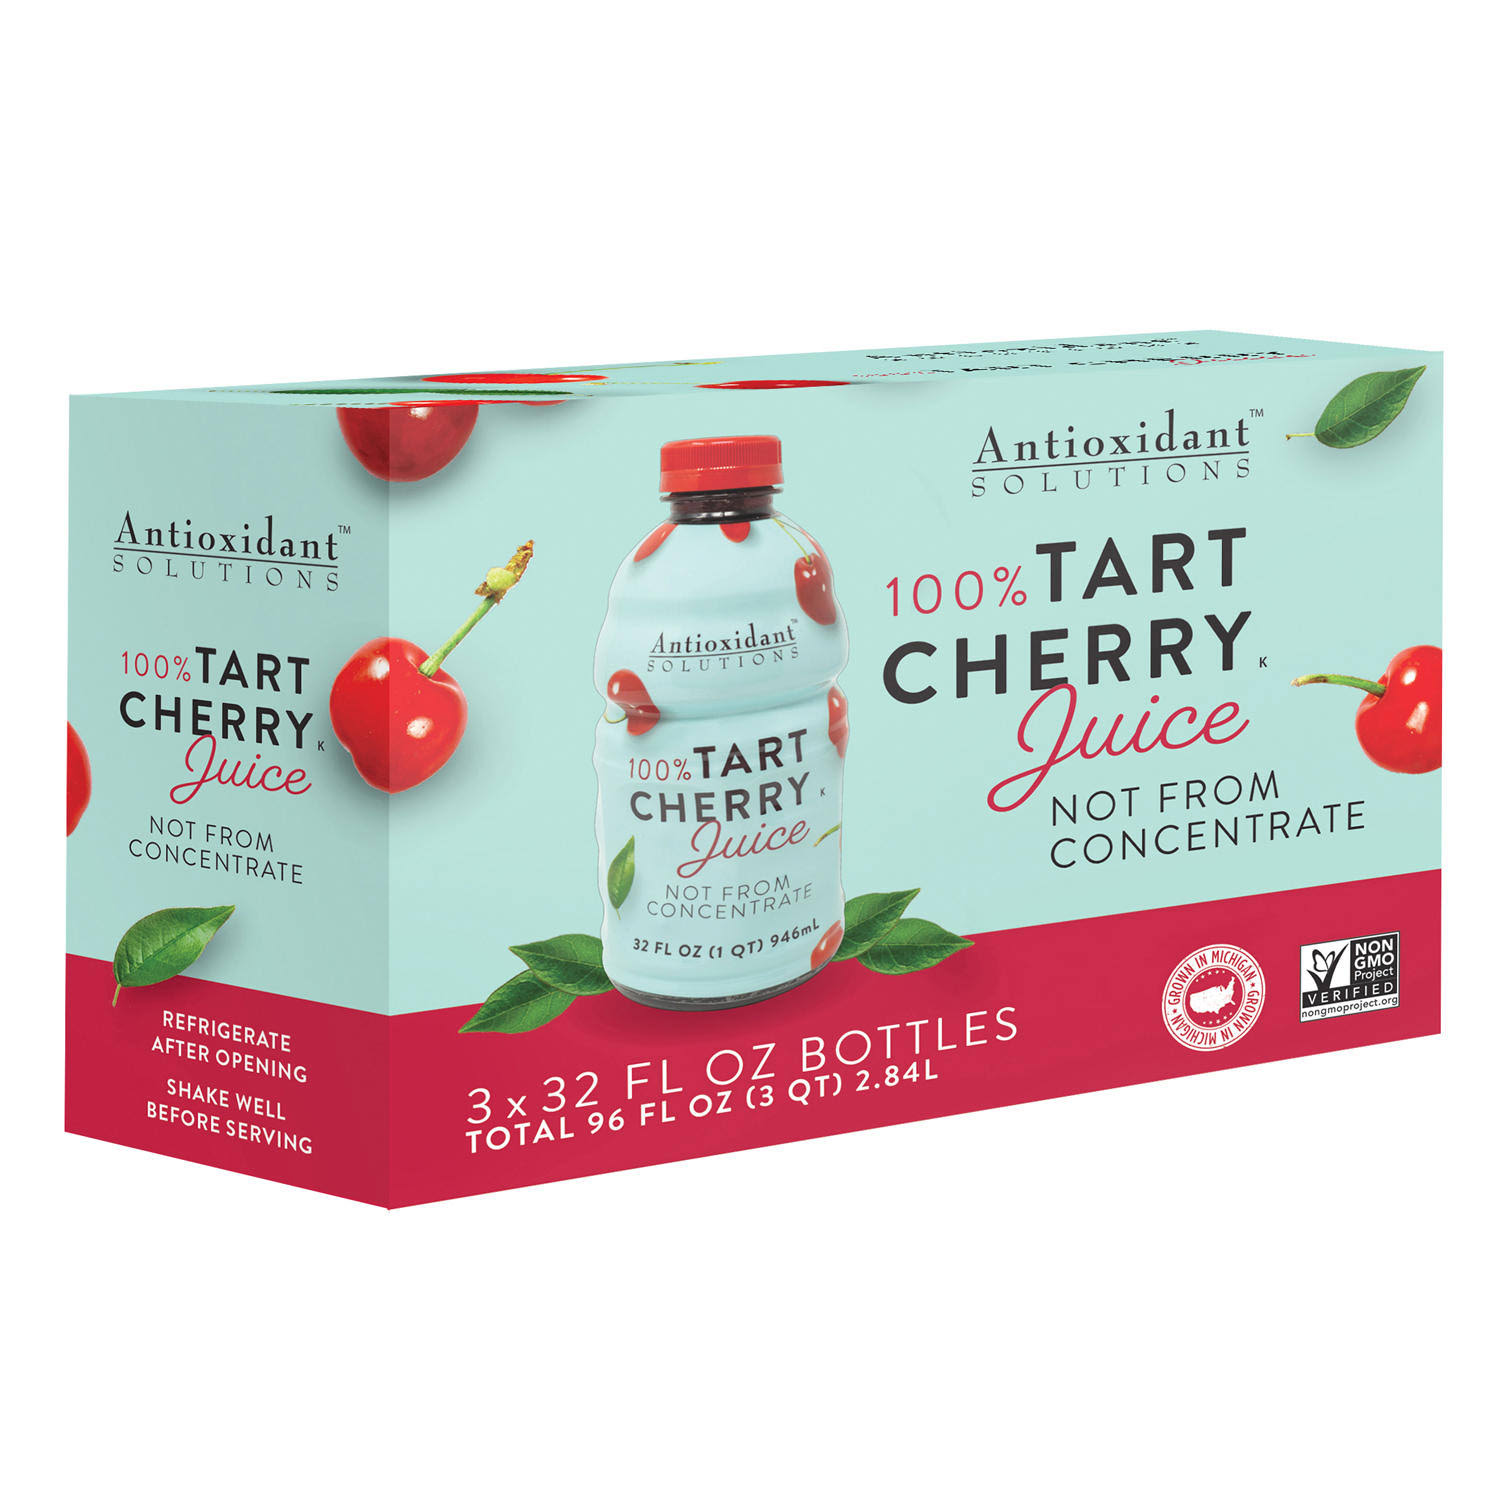 Antioxidant Solutions Not from Concentrate 100% Tart Cherry Juice